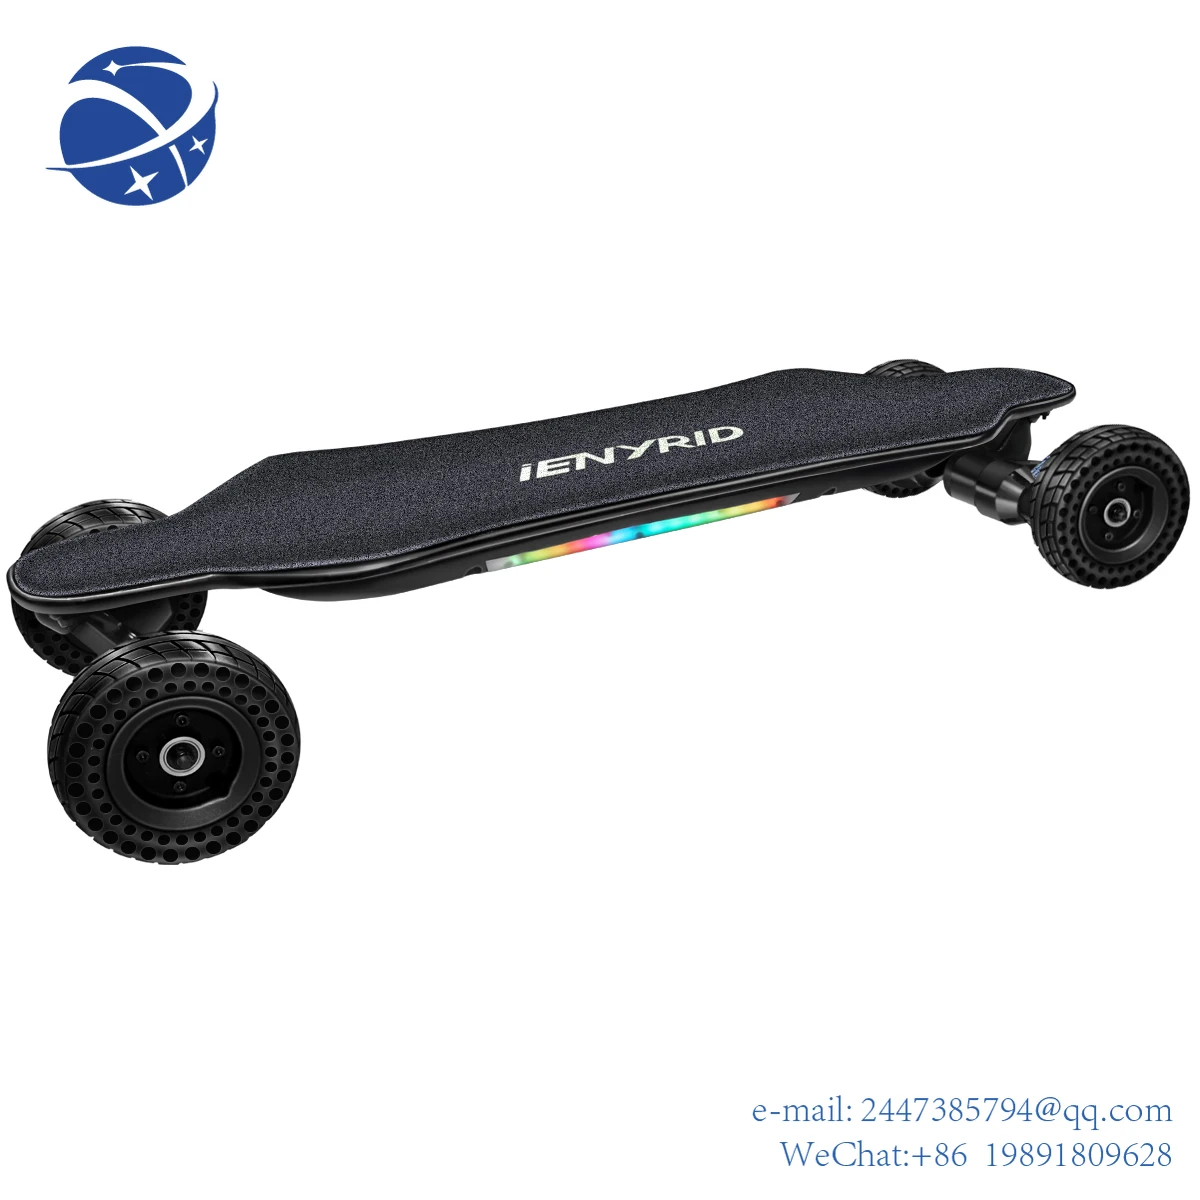 Yun YiUSA warehouse 4 wheel Electric SUV-skateboard Fast delivery time FCC ROHS CE electric skateboard is best rack card holder time cards goods organizer warehouse supplies materials shelf attendance